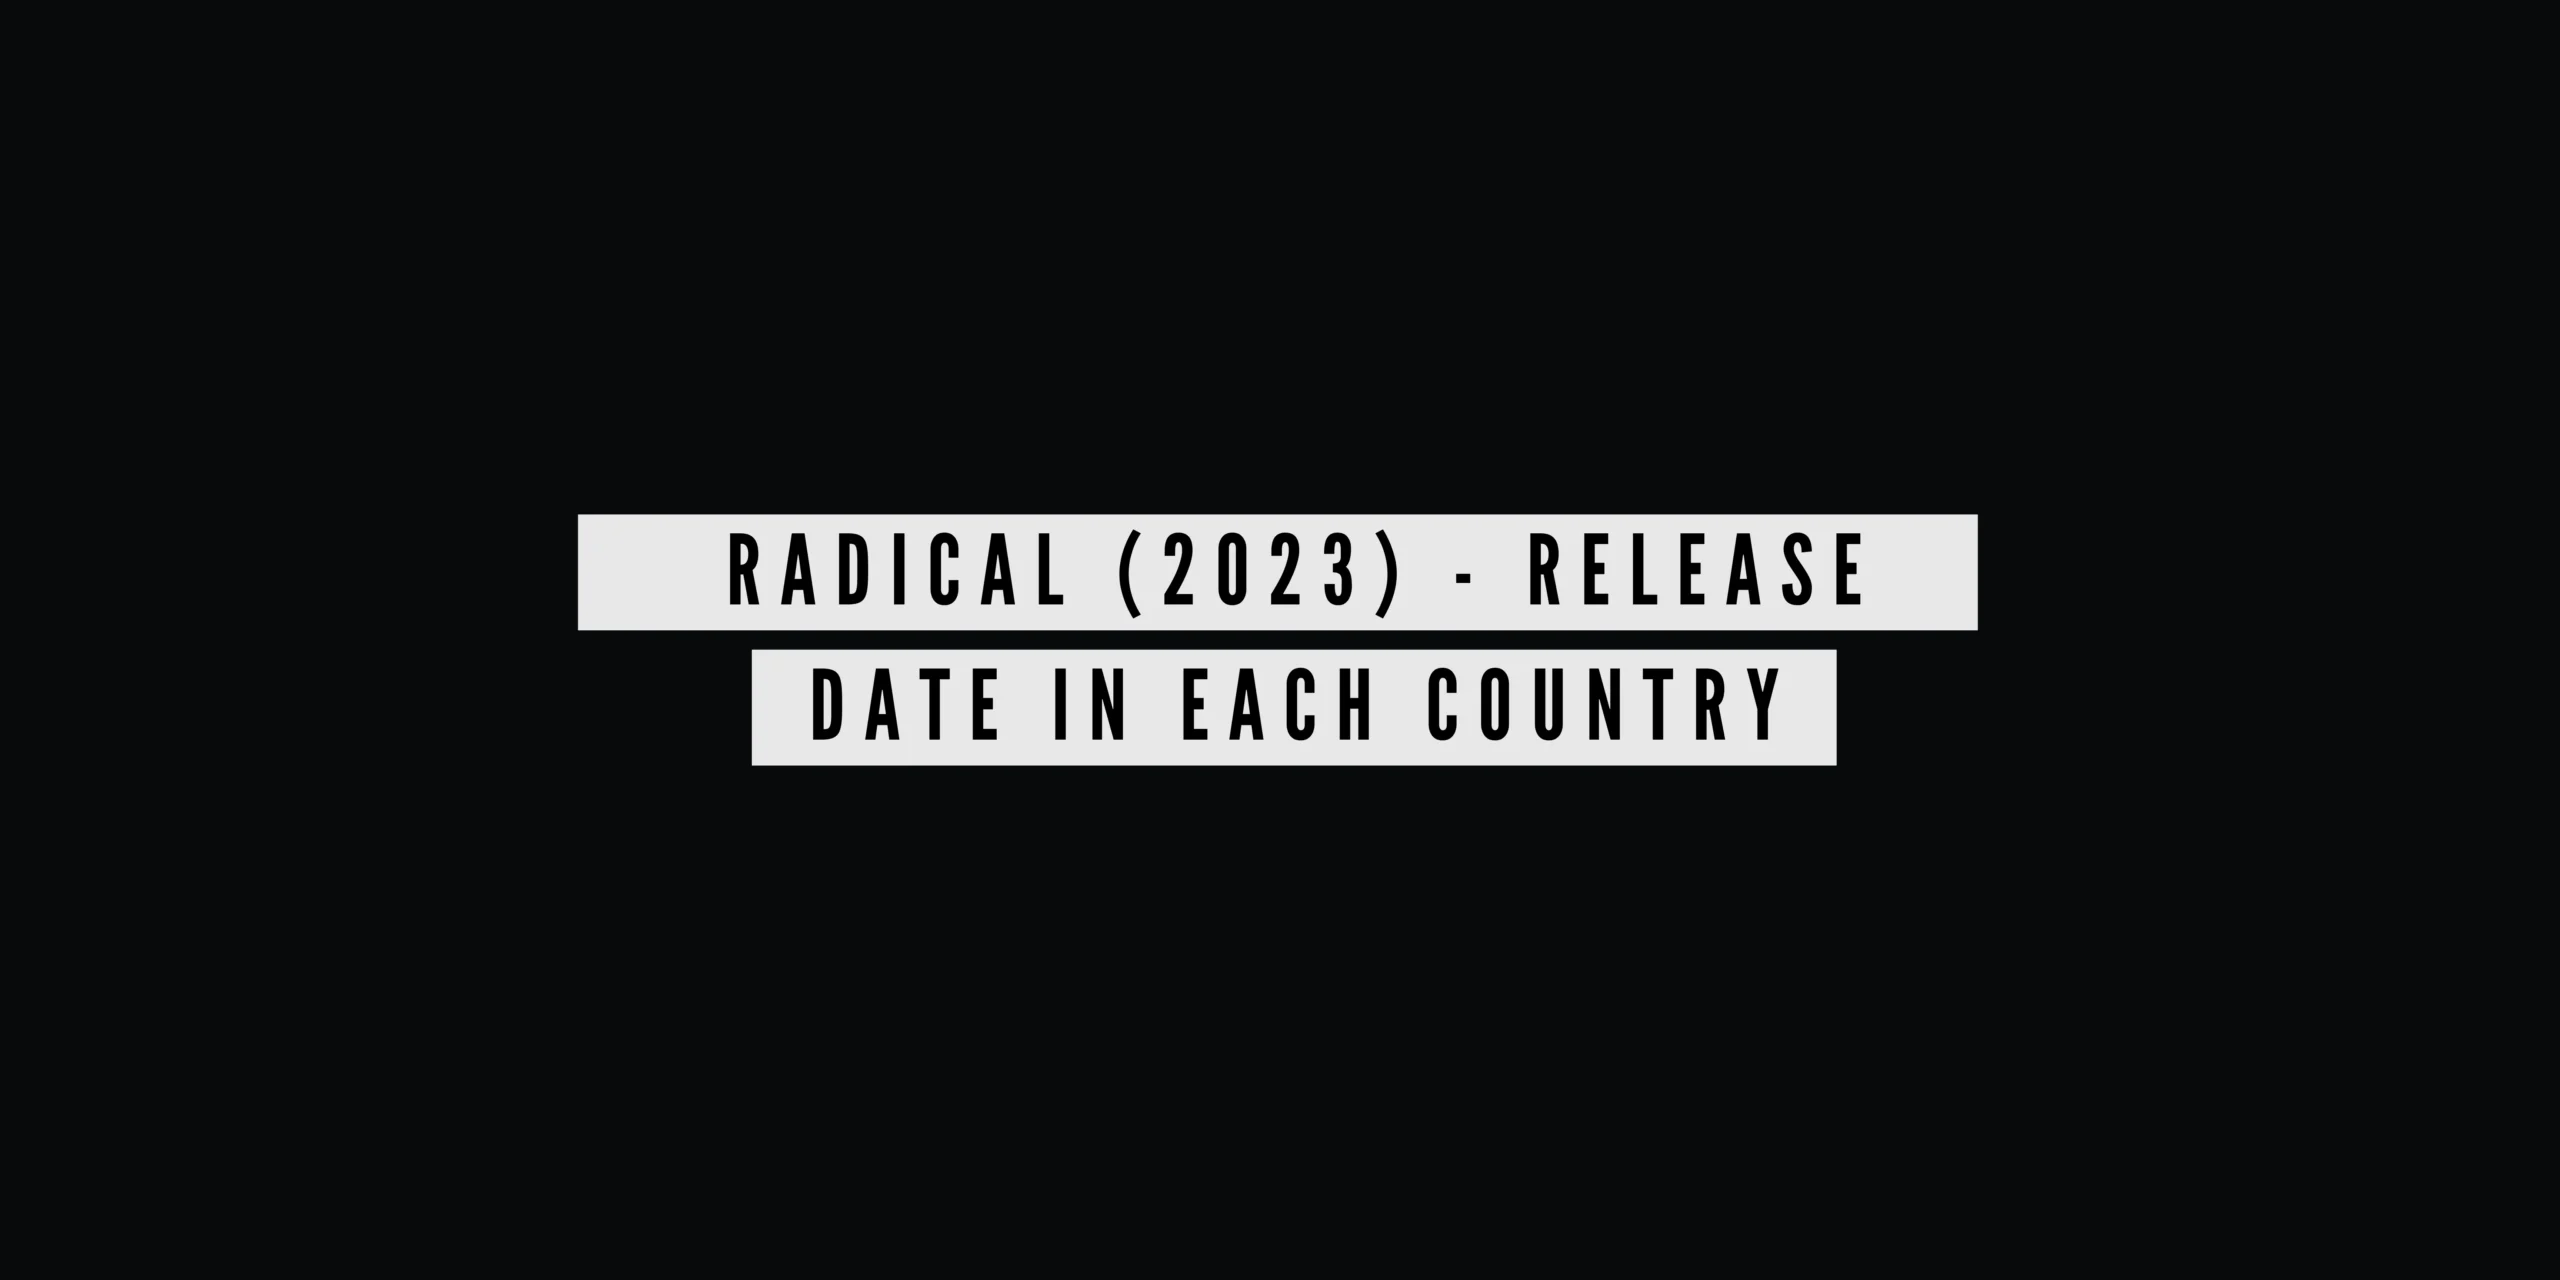 Radical (2023) - Release Date In Each Country